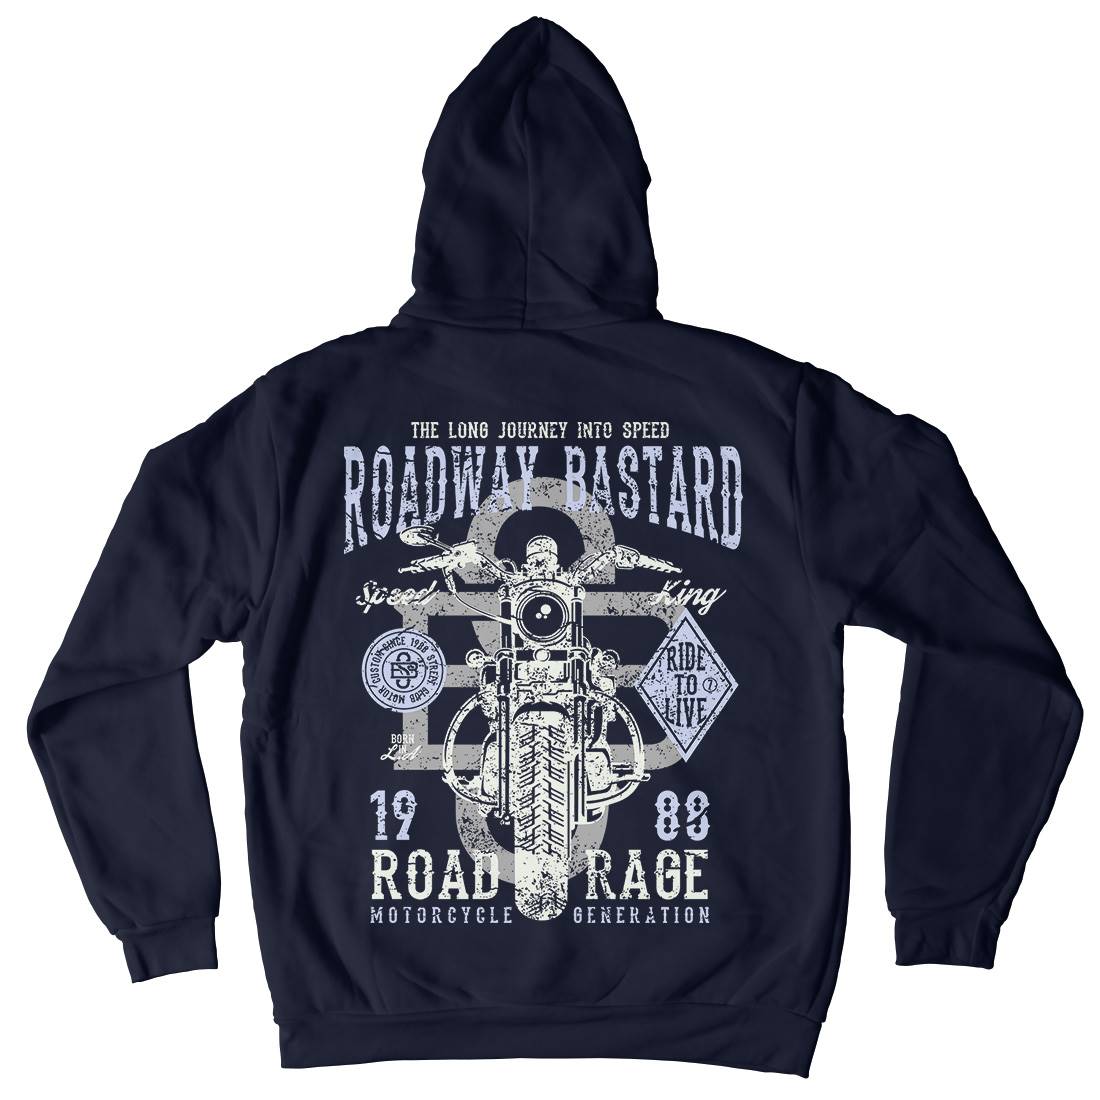 Roadway Bastard Mens Hoodie With Pocket Motorcycles A123